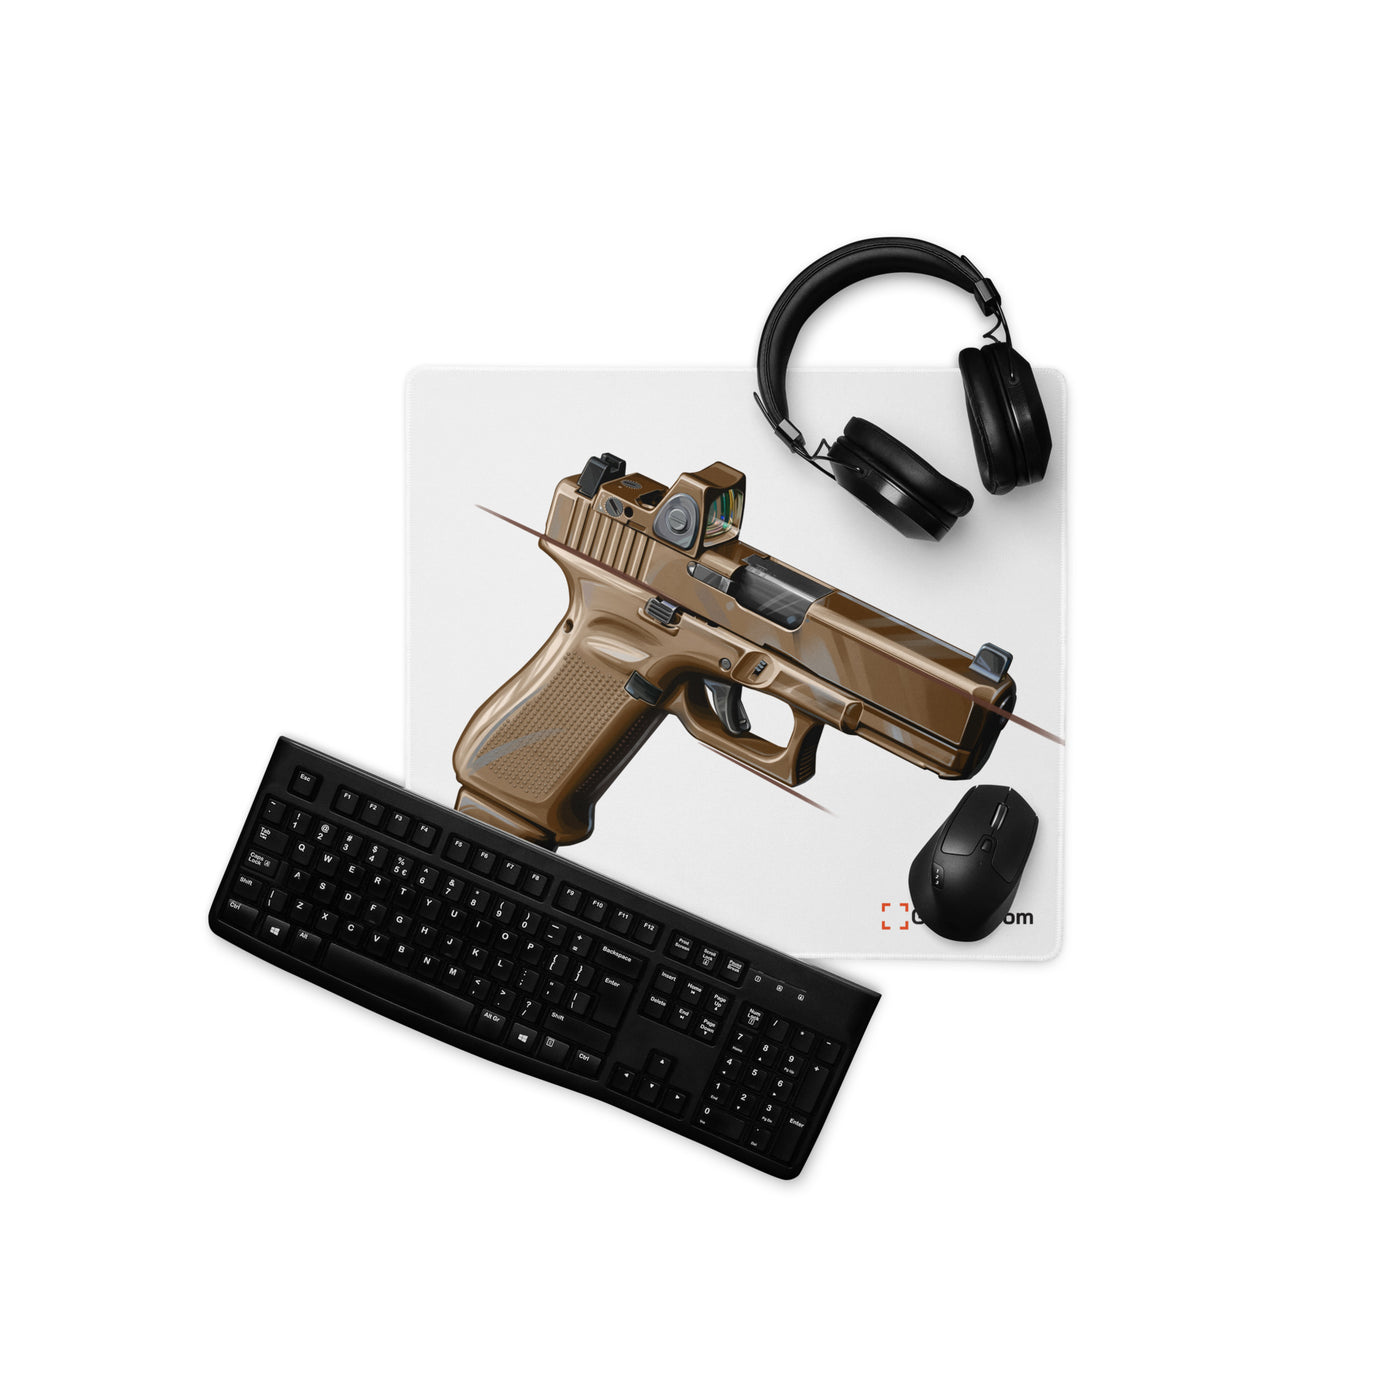 The Last Resort - OG Tan Poly Pistol Gaming Mouse Pad - Just The Piece - White Background